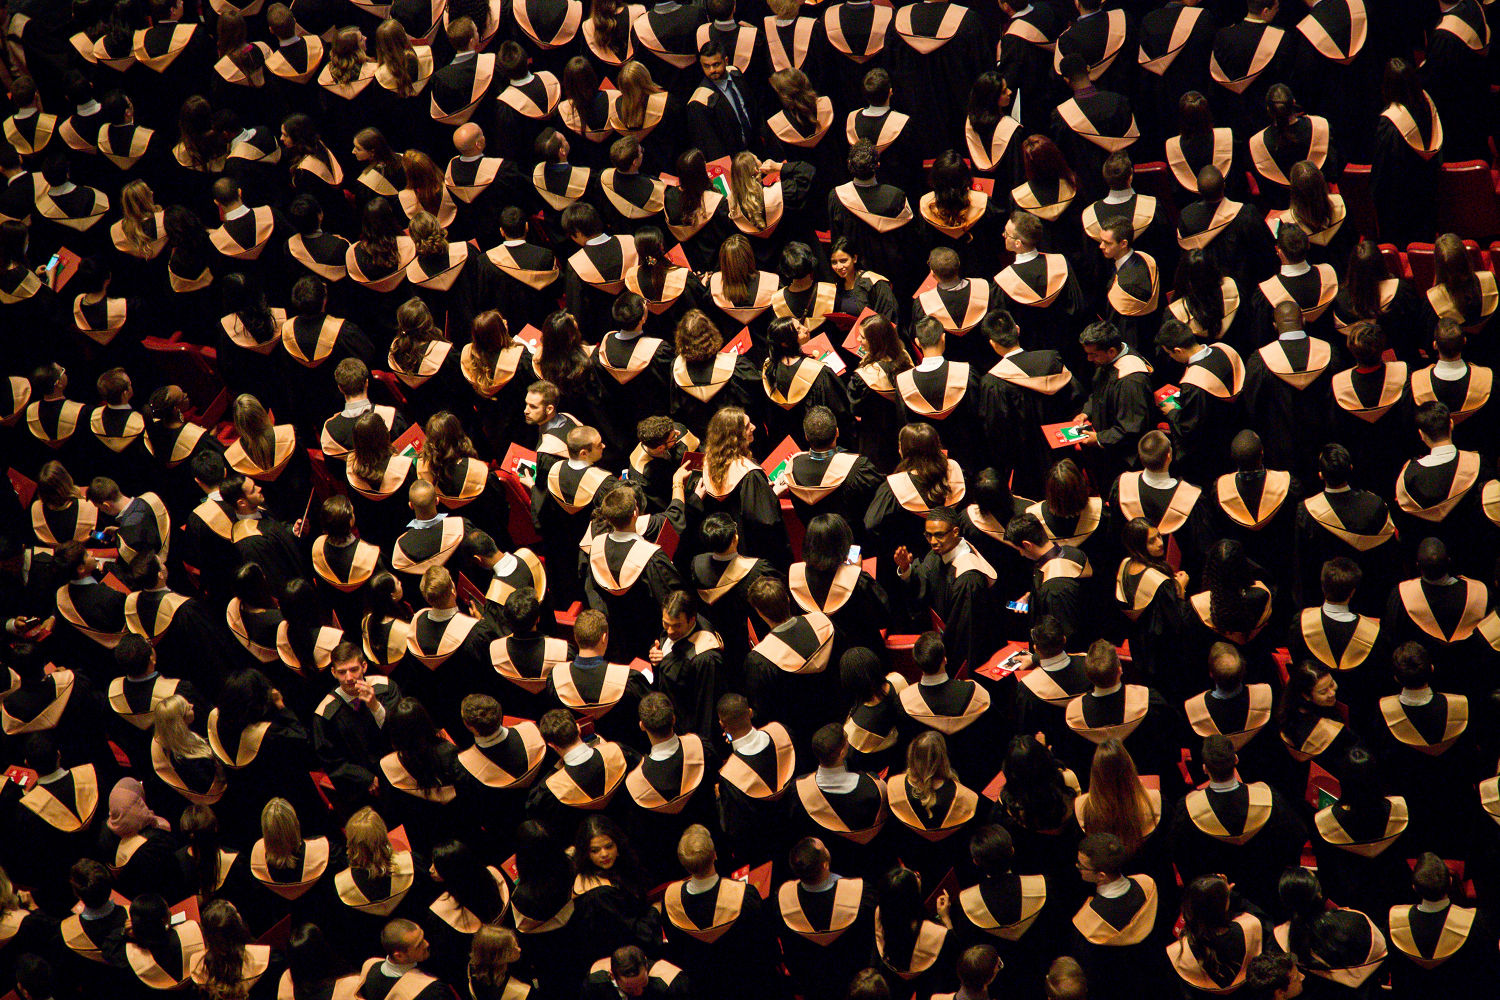 A photograph showing students at a graduation